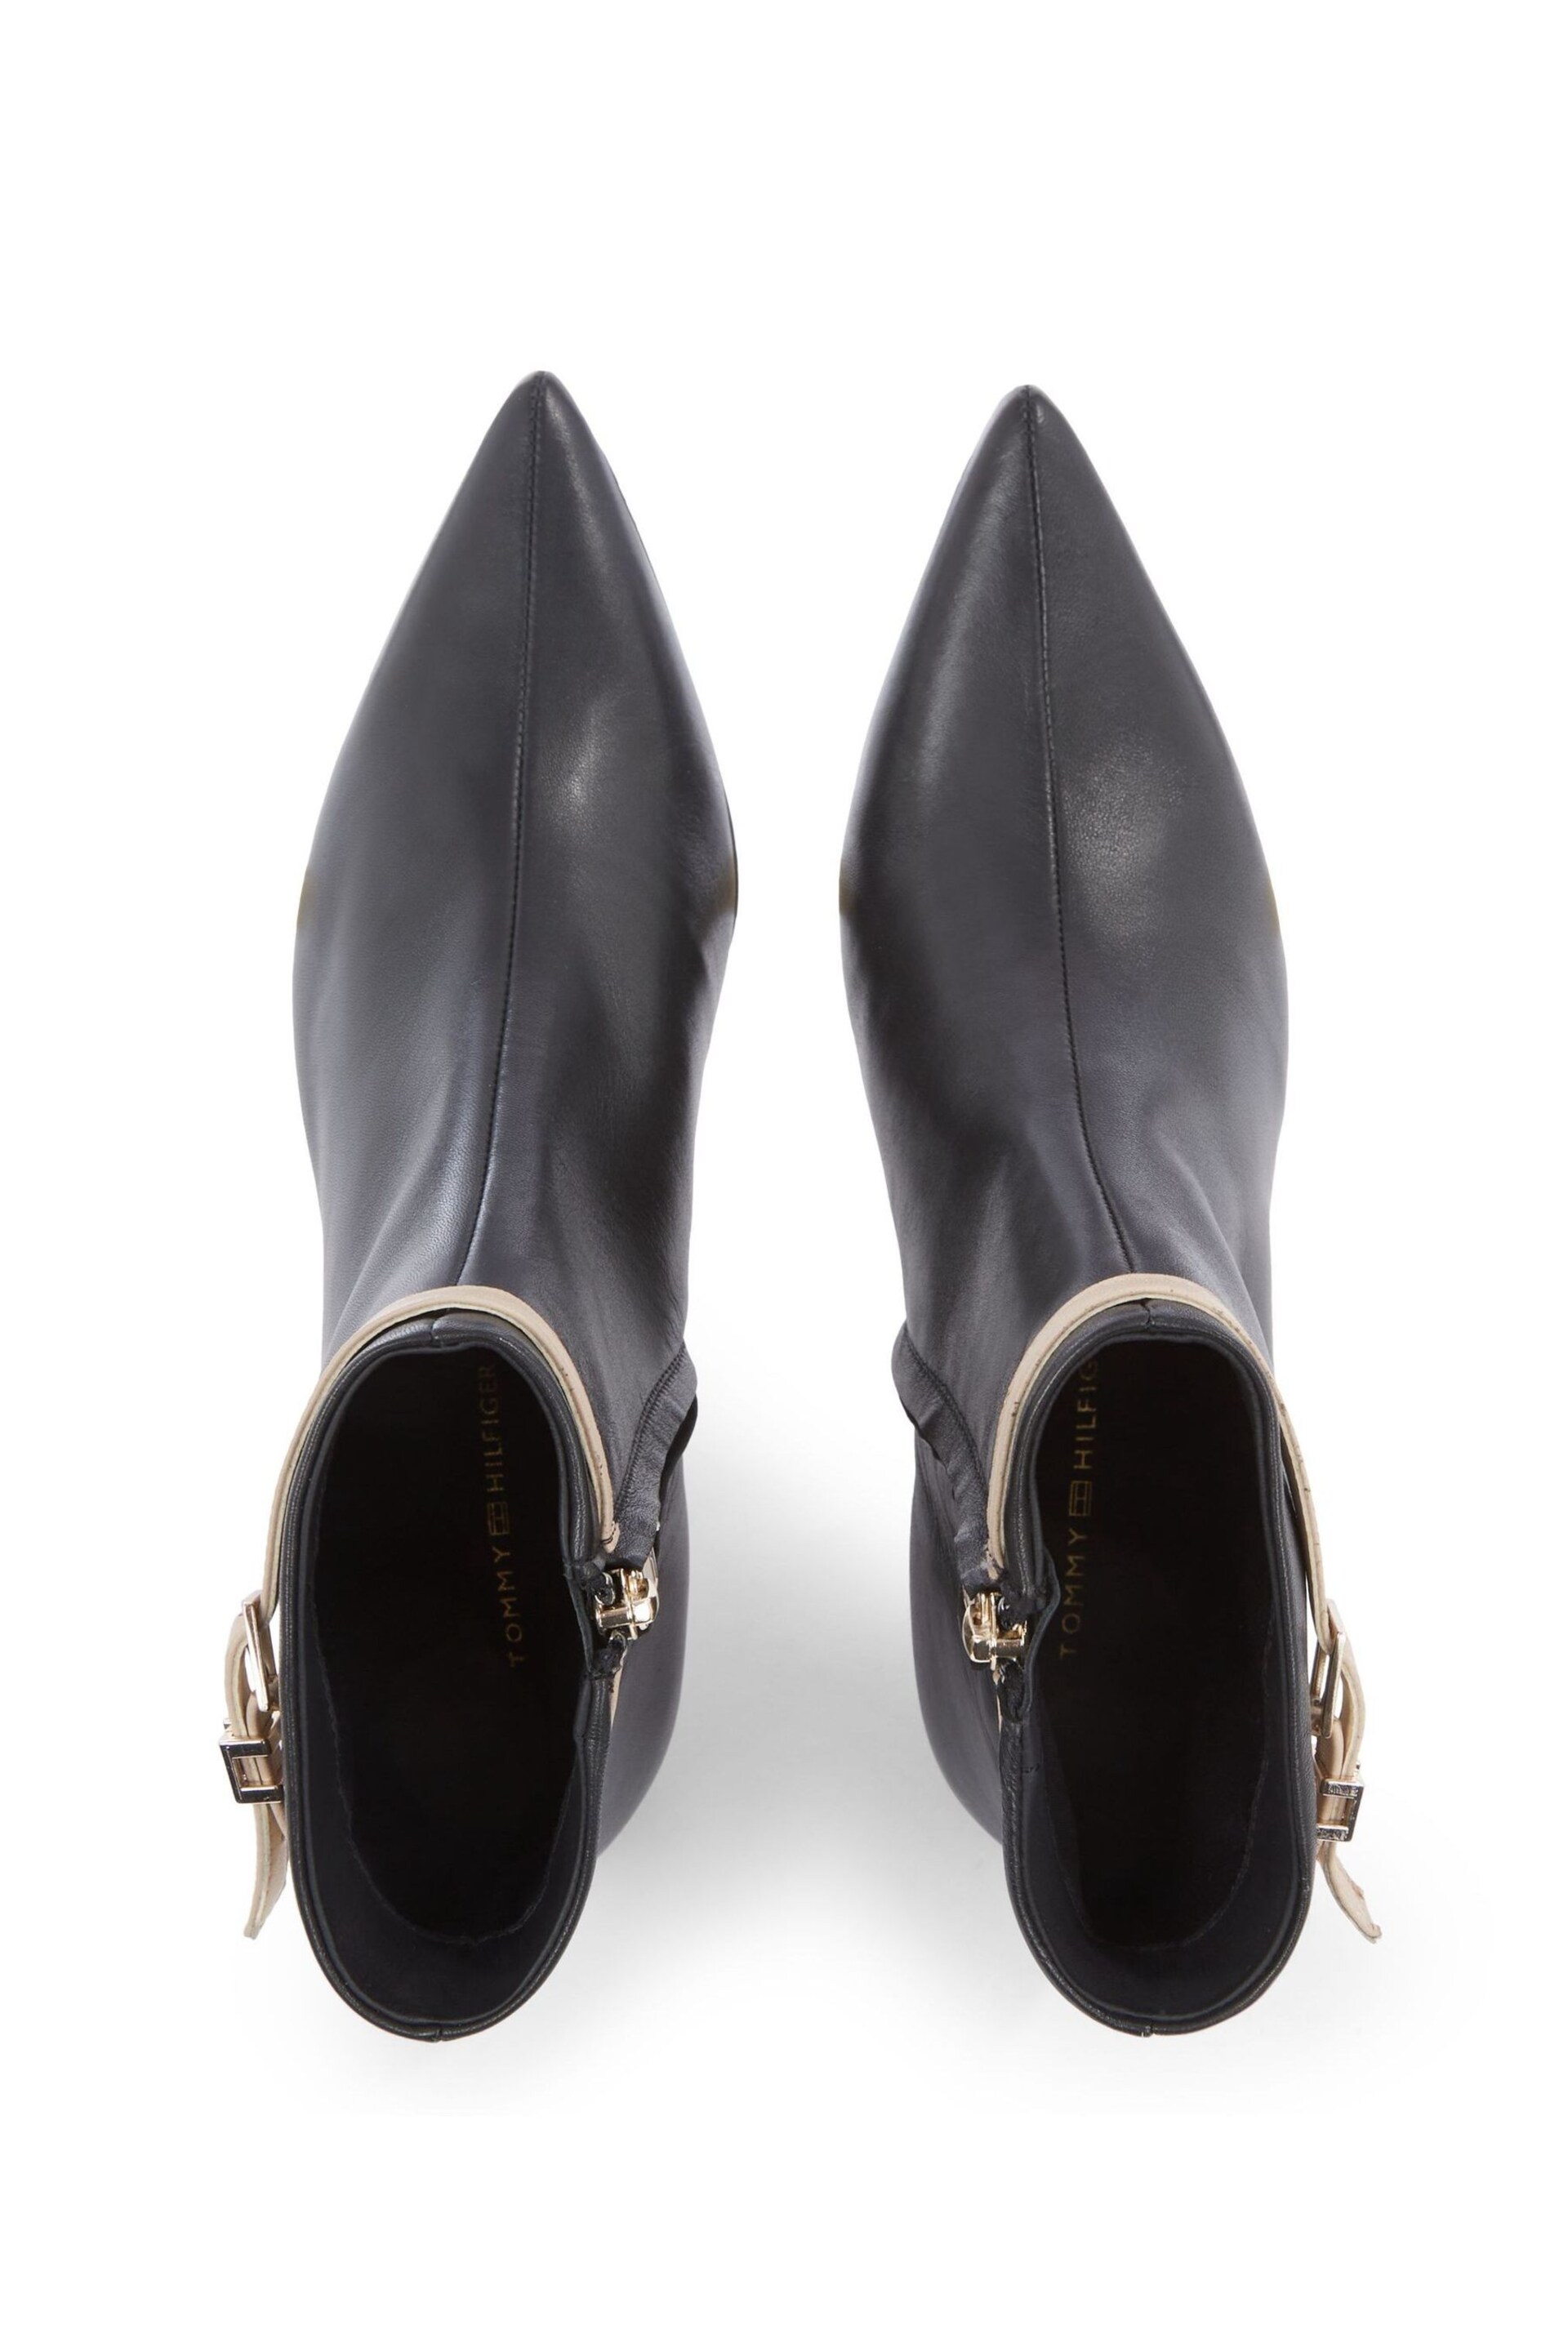 Tommy Hilfiger Leather Pointed Black Boots - Image 3 of 3